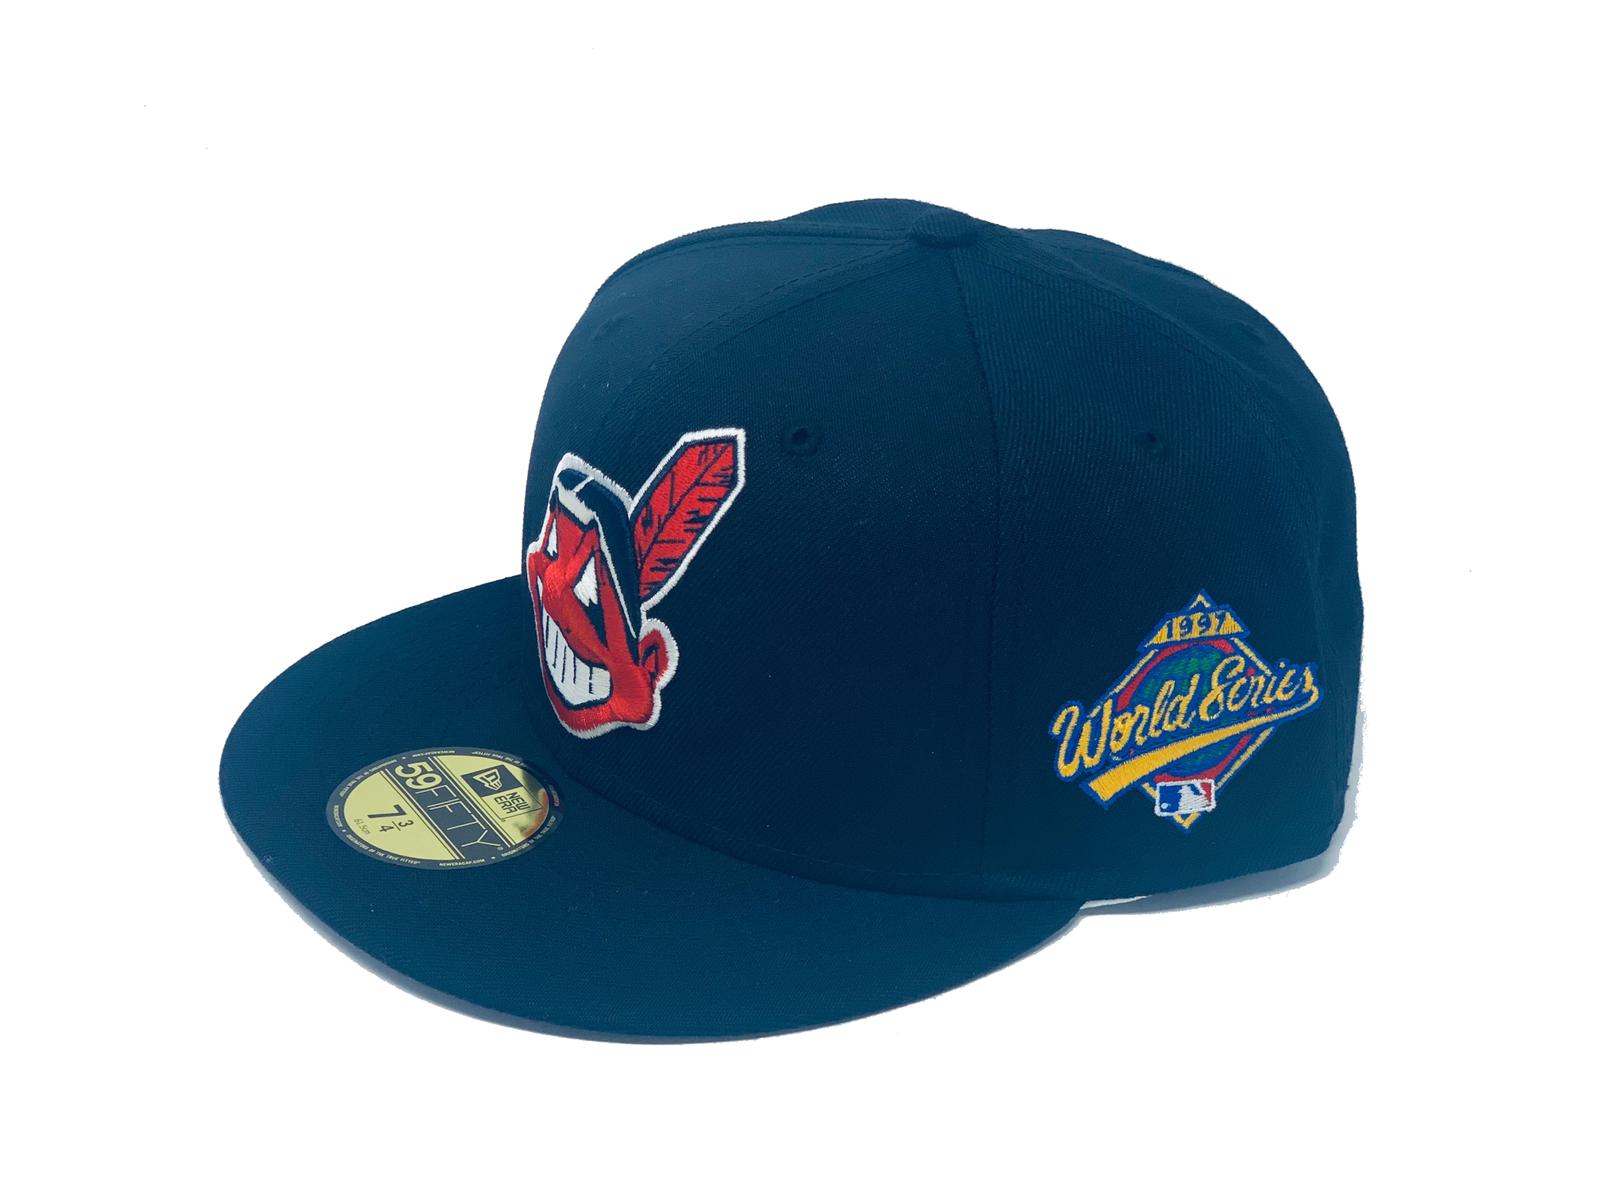 Cleveland Indians 1997 American League Champions Clubhouse World Series hat.